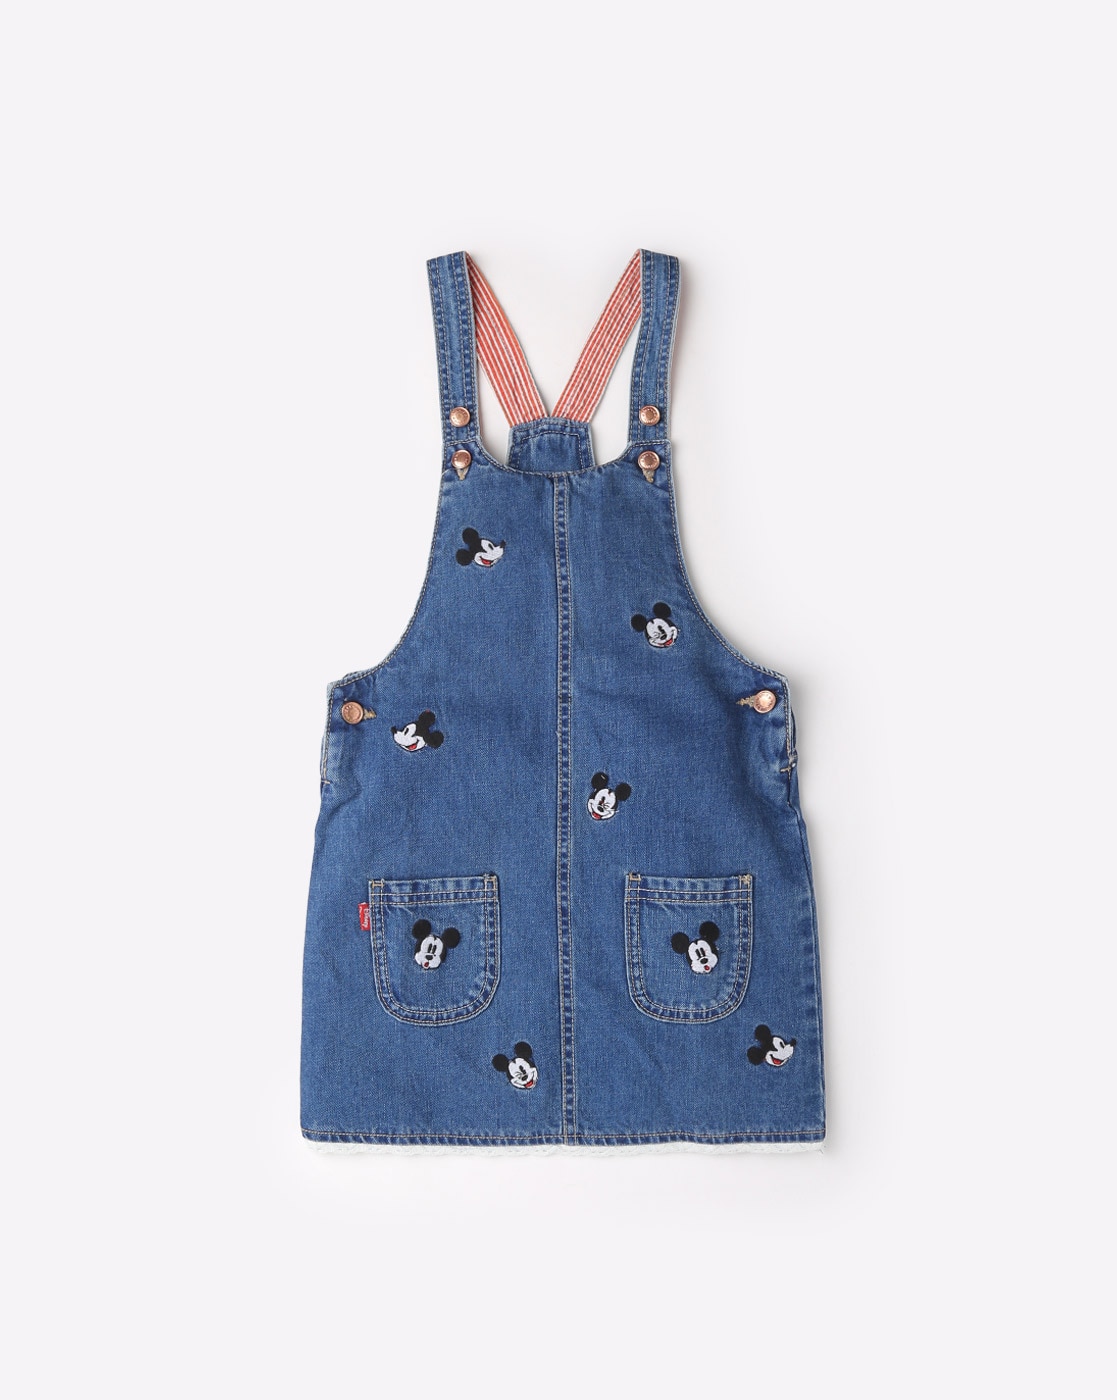 mickey mouse dungarees womens